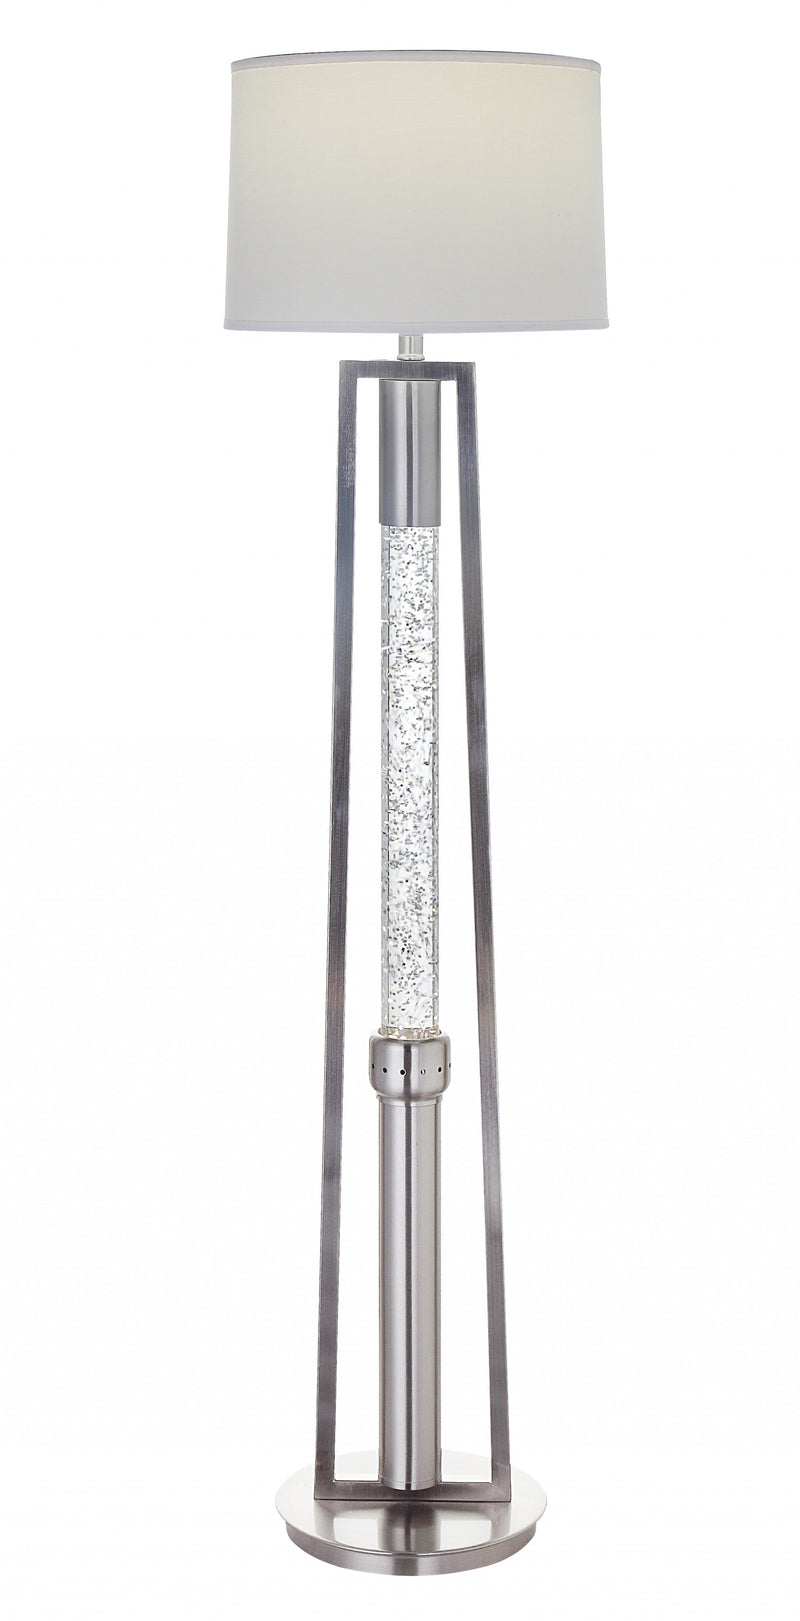 Home Outfitters 15" X 15" X 58" Brushed Nickel Metal Glass Led Shade Floor Lamp